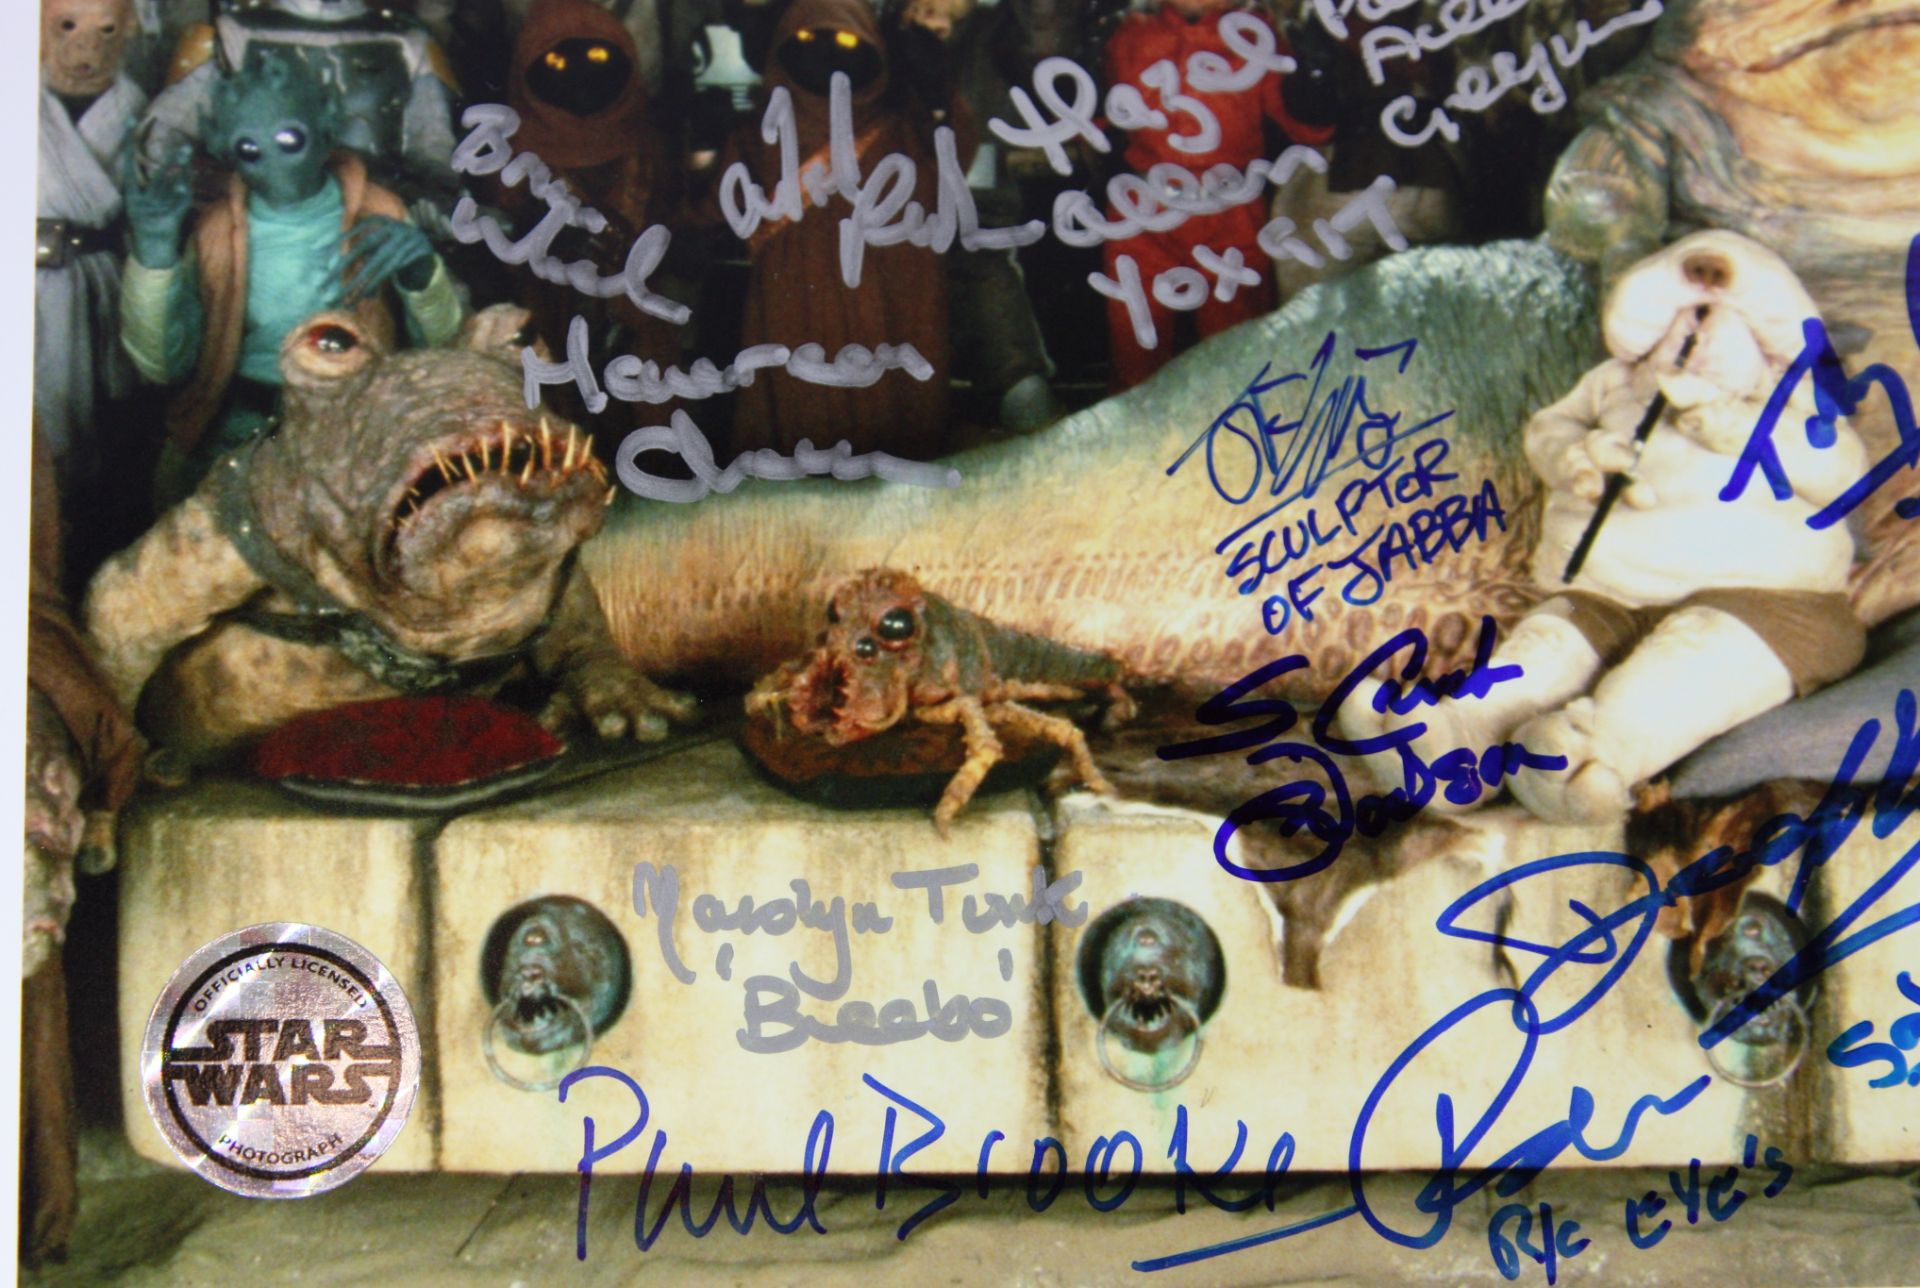 STAR WARS - RETURN OF THE JEDI - JABBA'S PALACE OFFICIAL PIX SIGNED X21 - Image 5 of 5